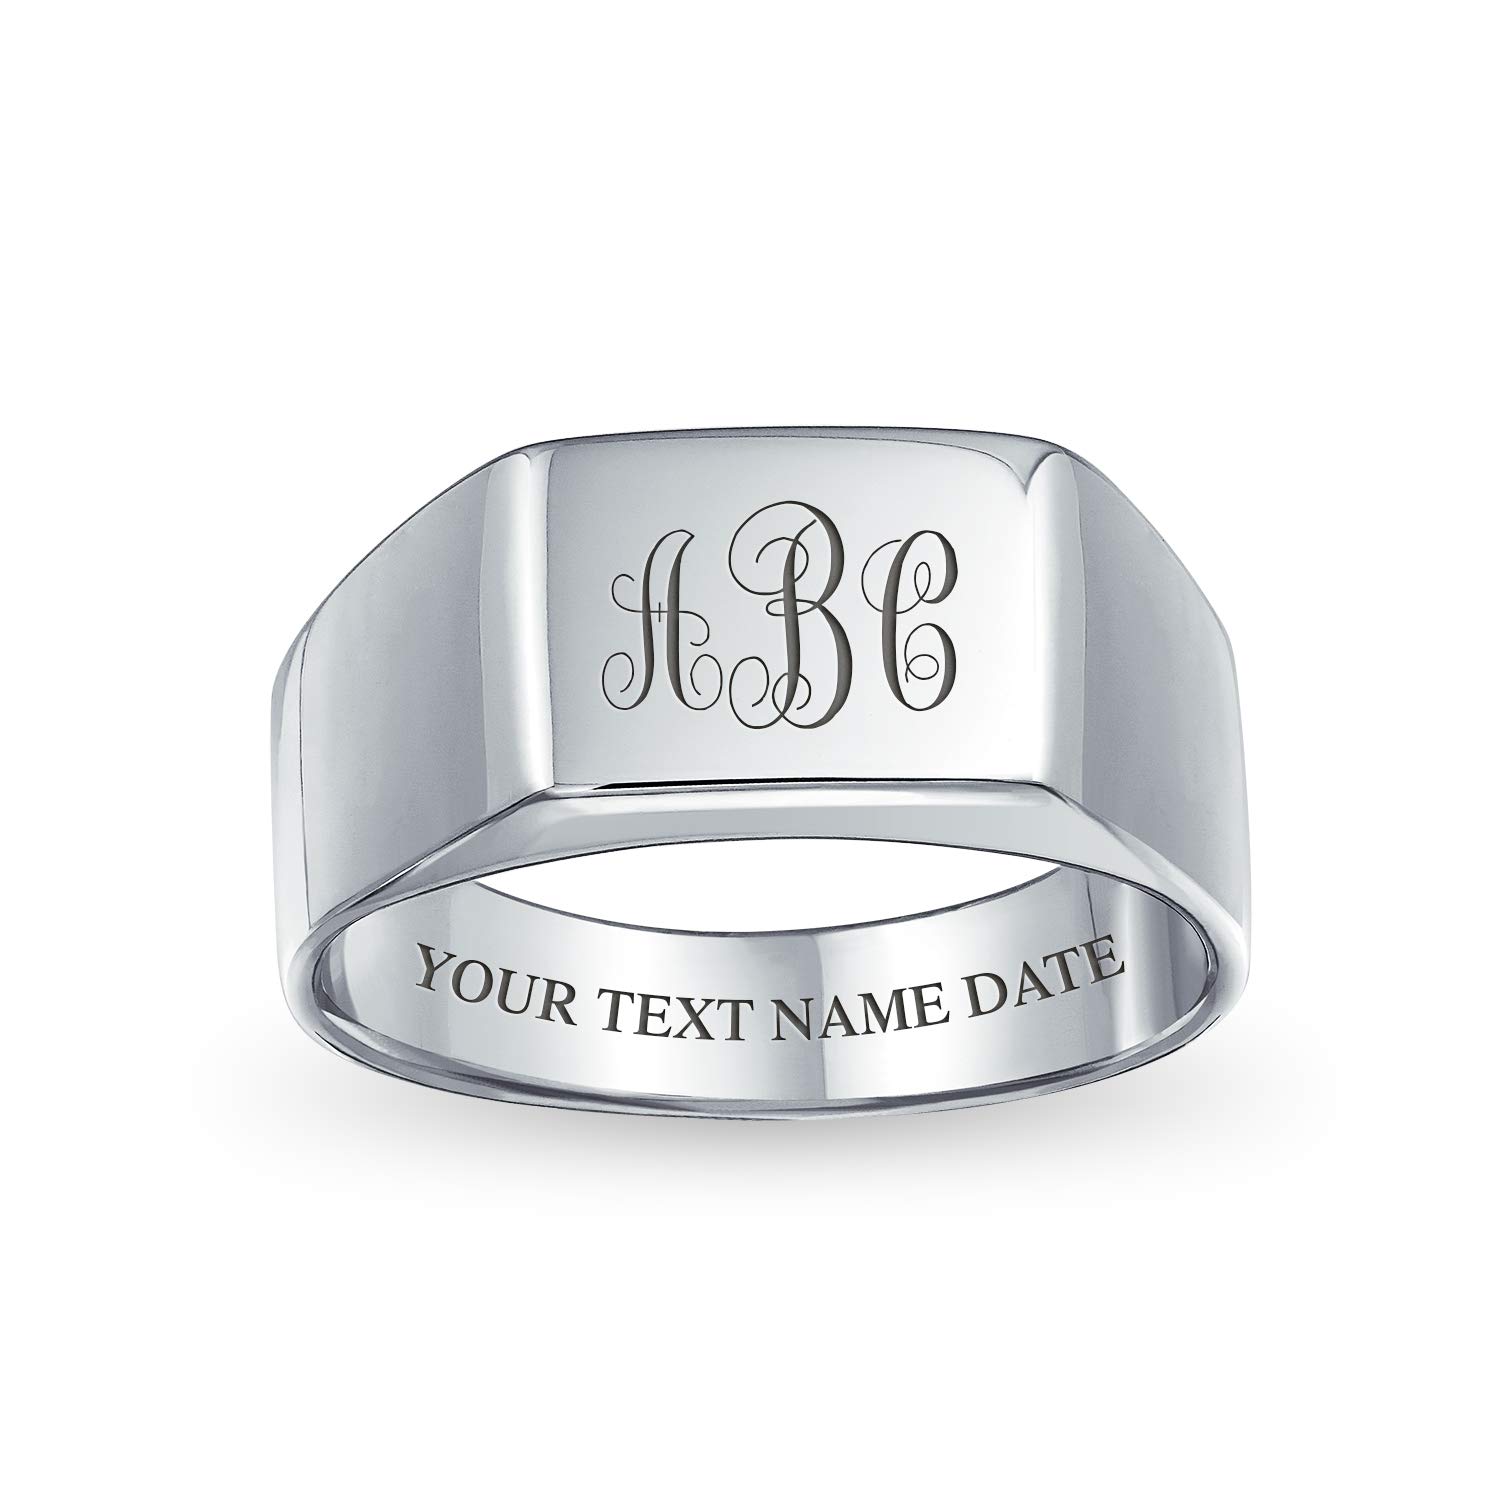 Bling Jewelry Geometric Customize Engrave Simple Wide Rectangle Initial Monogram Signet Ring For Men .925 Sterling Silver Shinny Finish